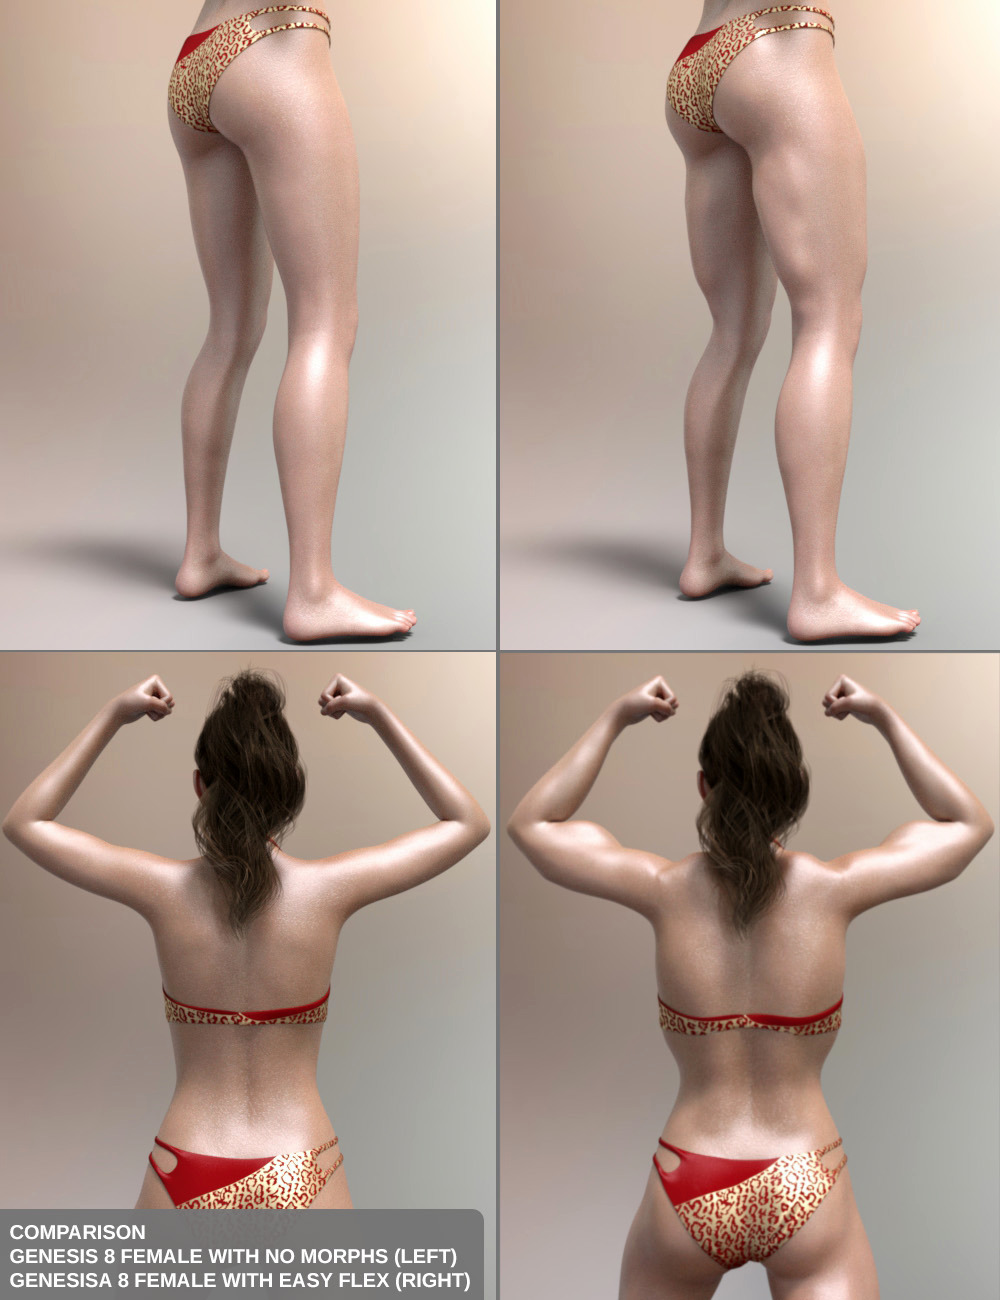 Easy Flex - Muscularity Morphs for Genesis 8 Female and Merchant Resource by: SF-Design, 3D Models by Daz 3D